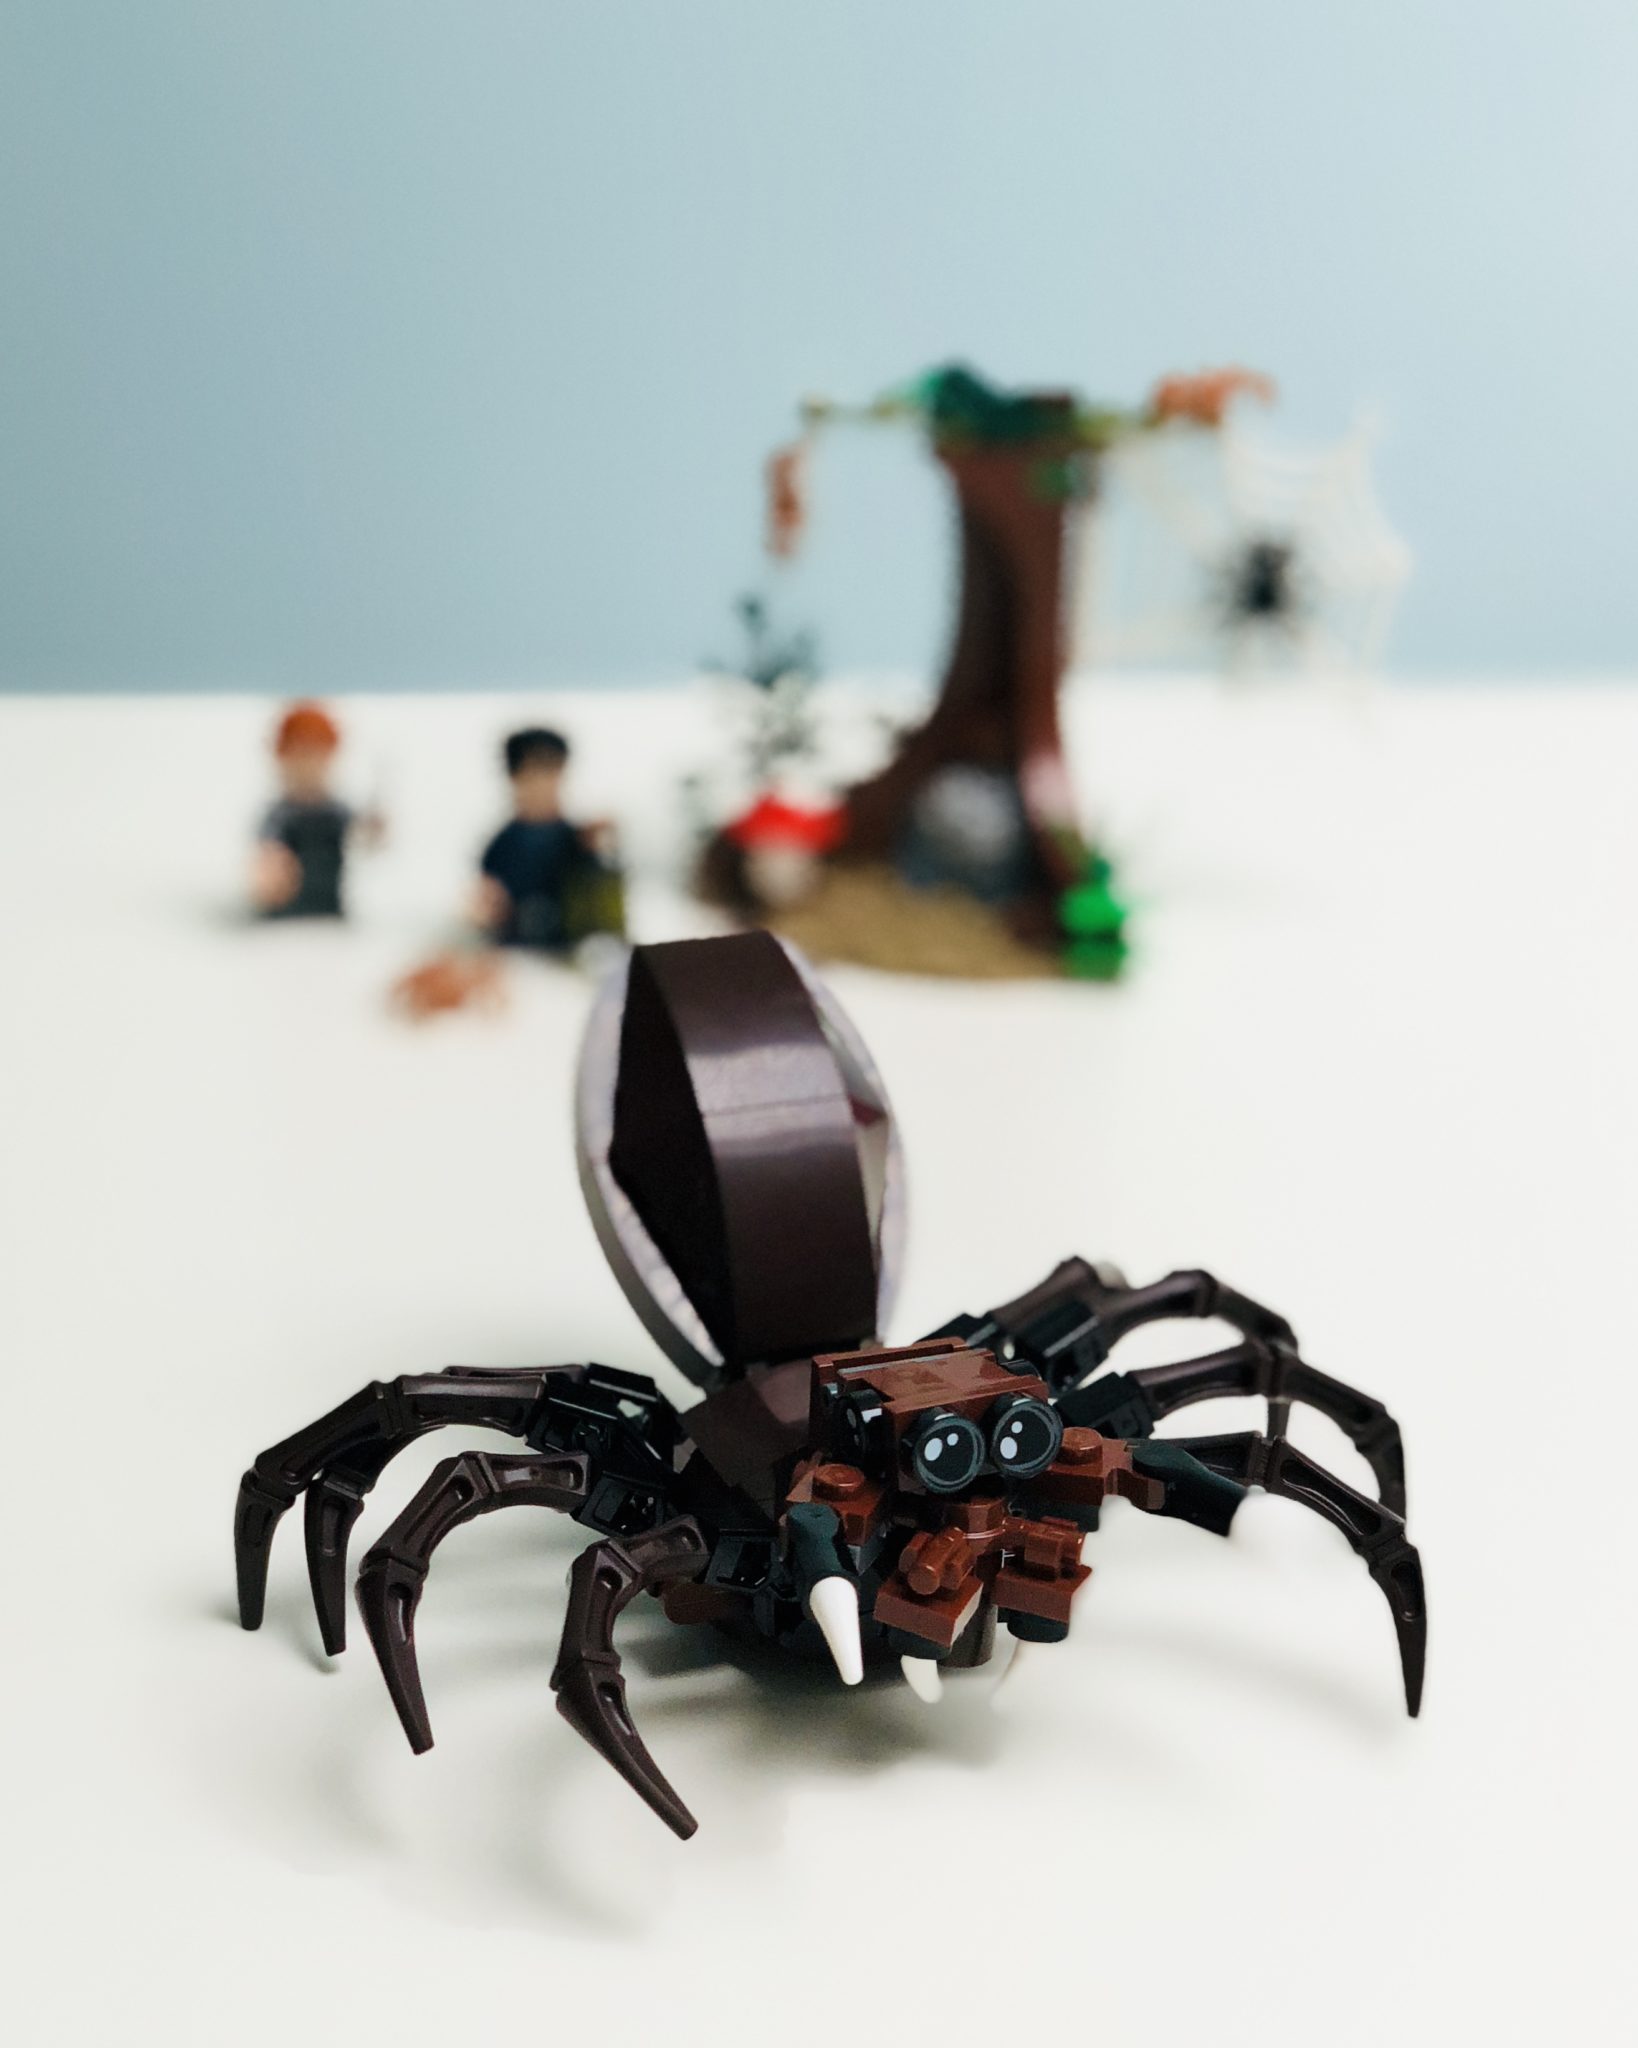 Aragog made entirely out of Lego!